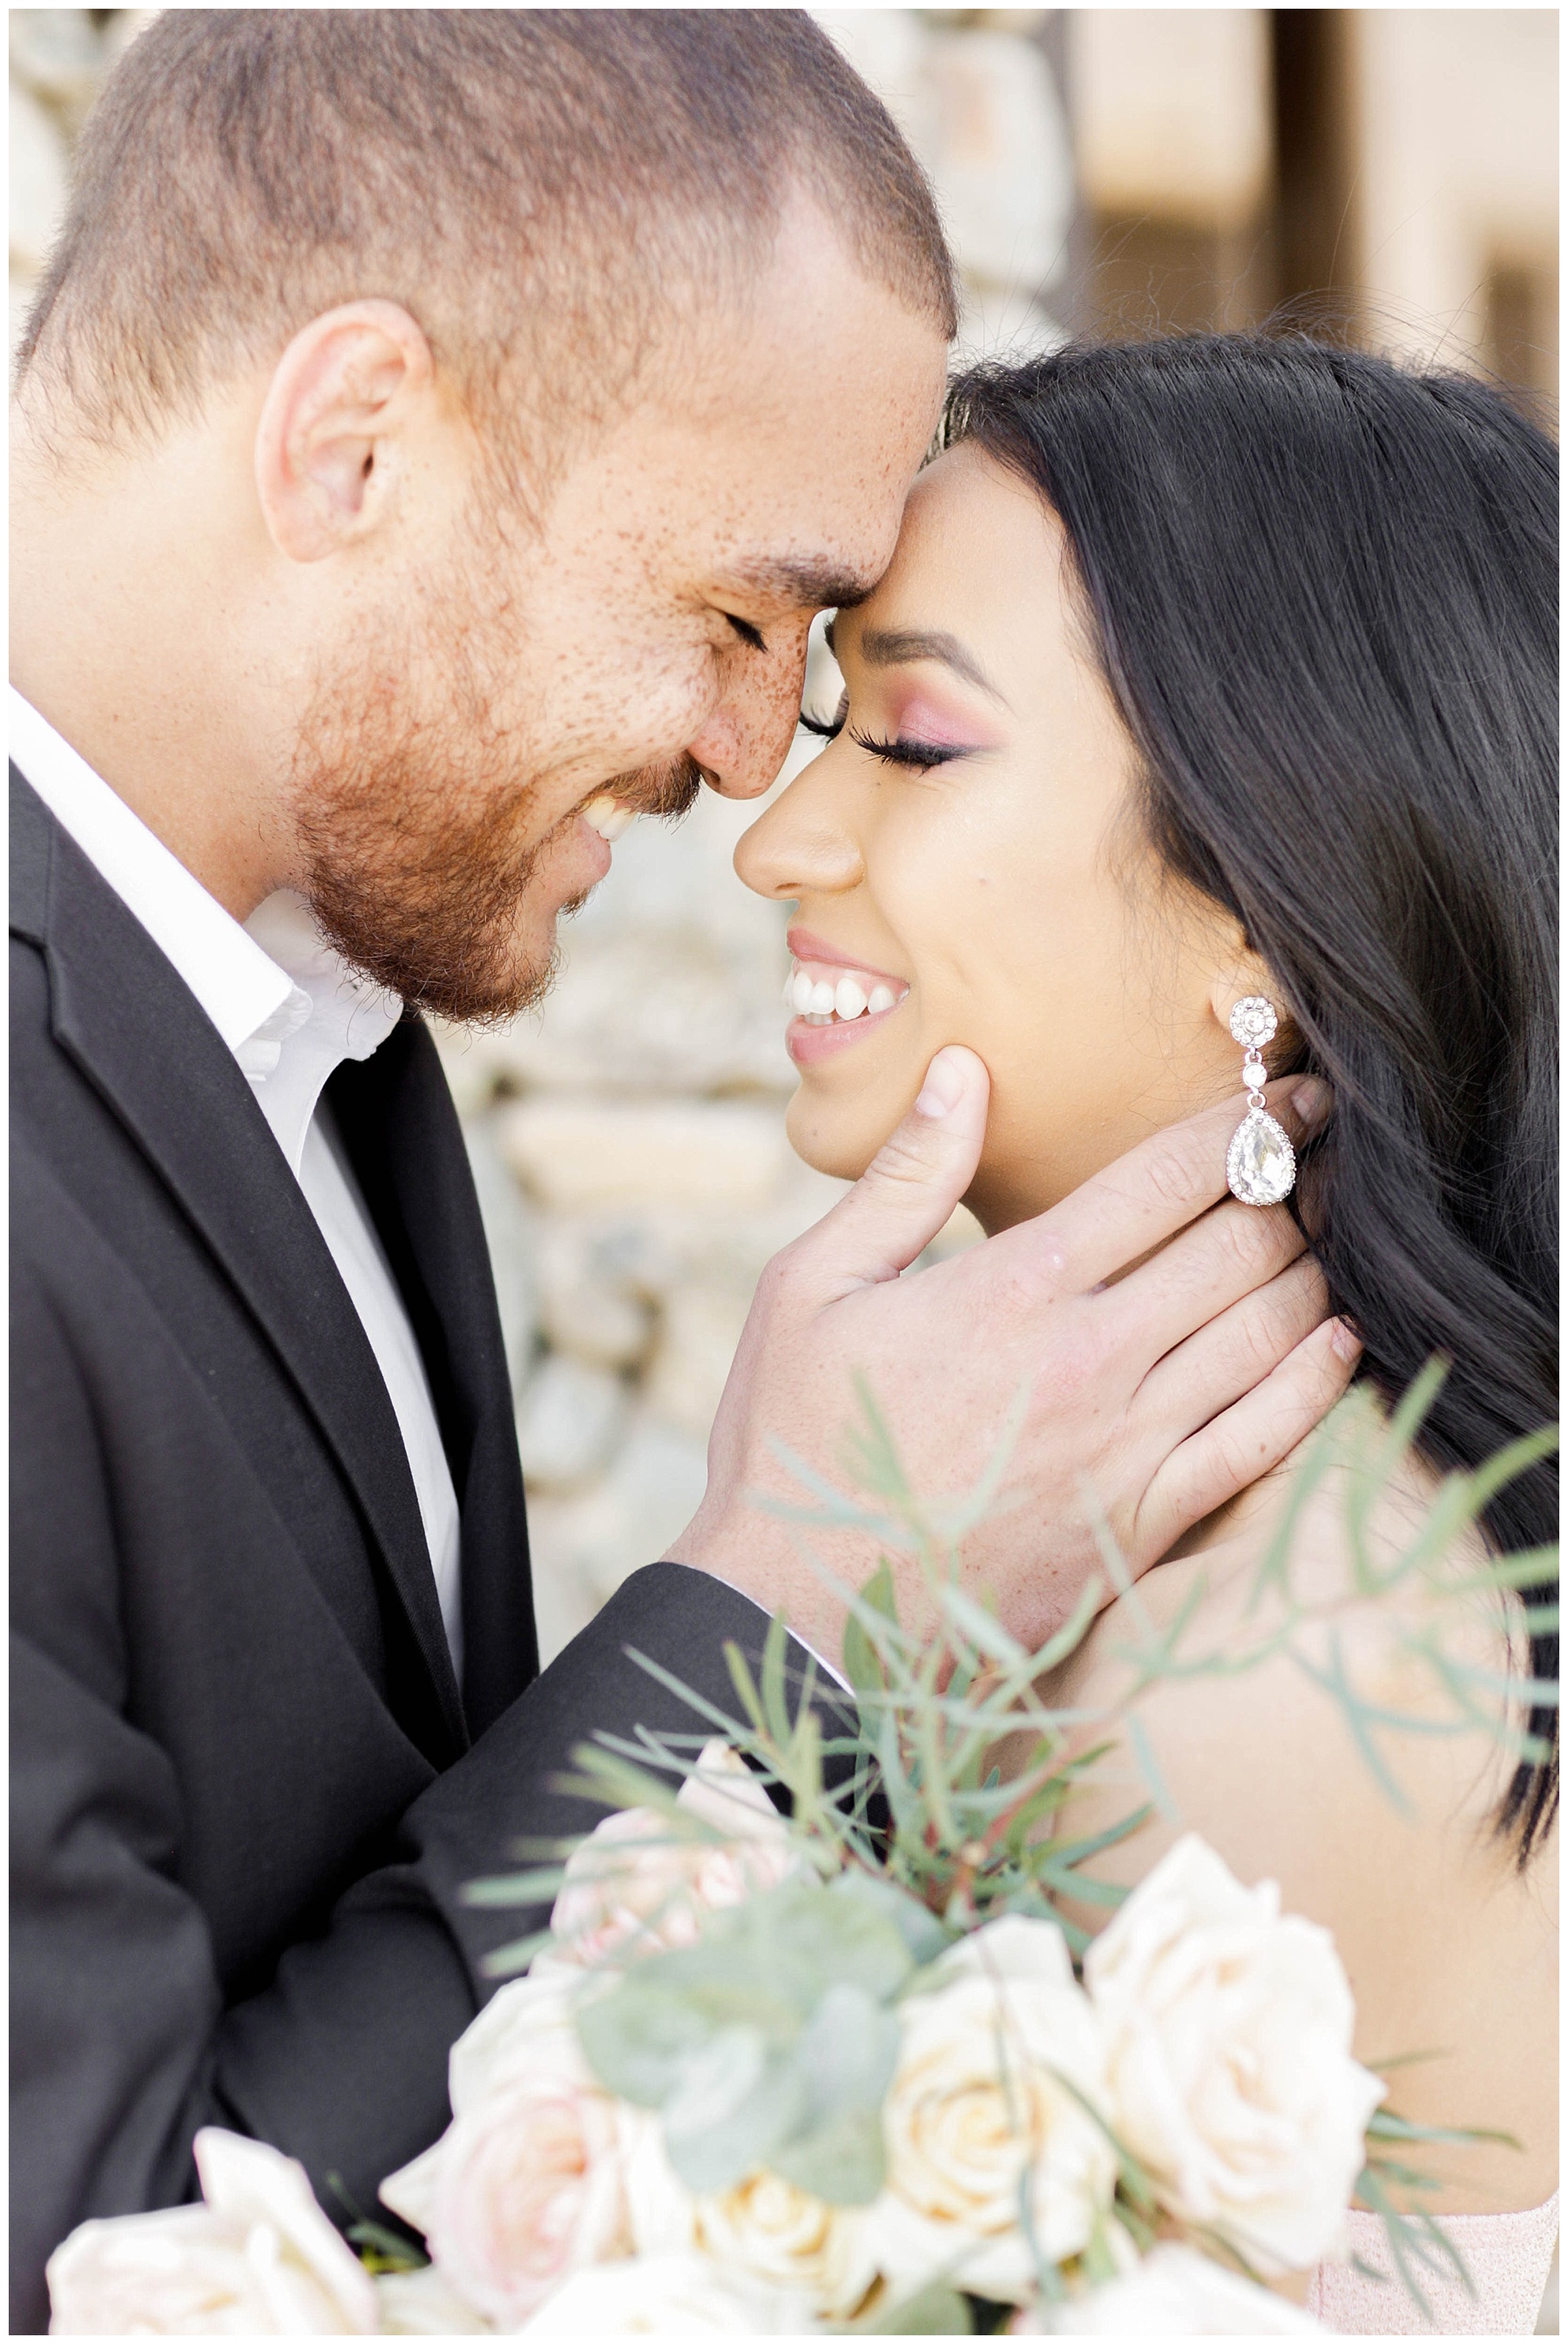 couples photography in phoenix, az, desert anniversary session at south mountain